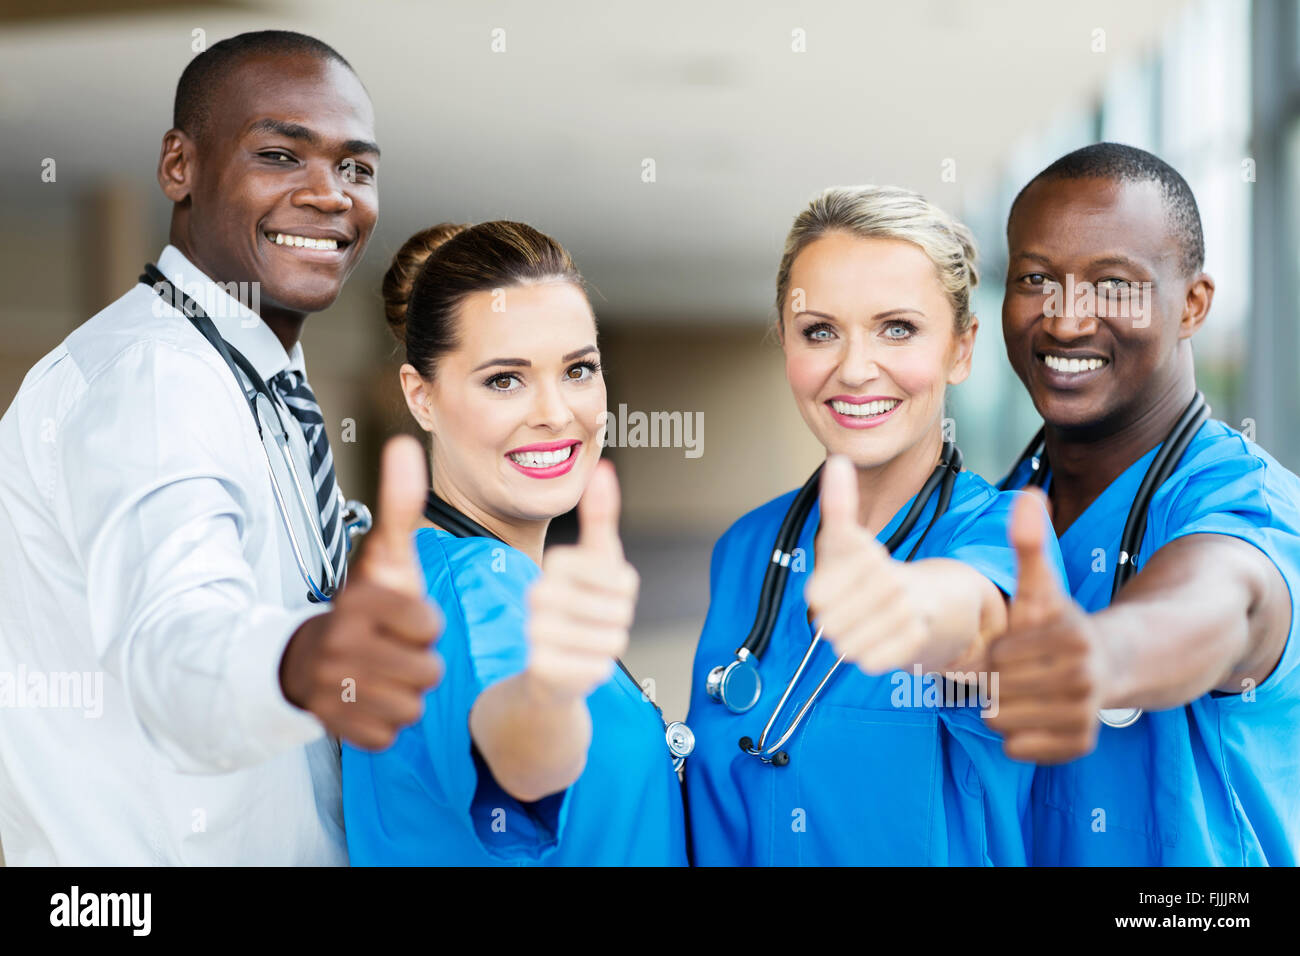 group of modern healthcare workers thumbs up Stock Photo